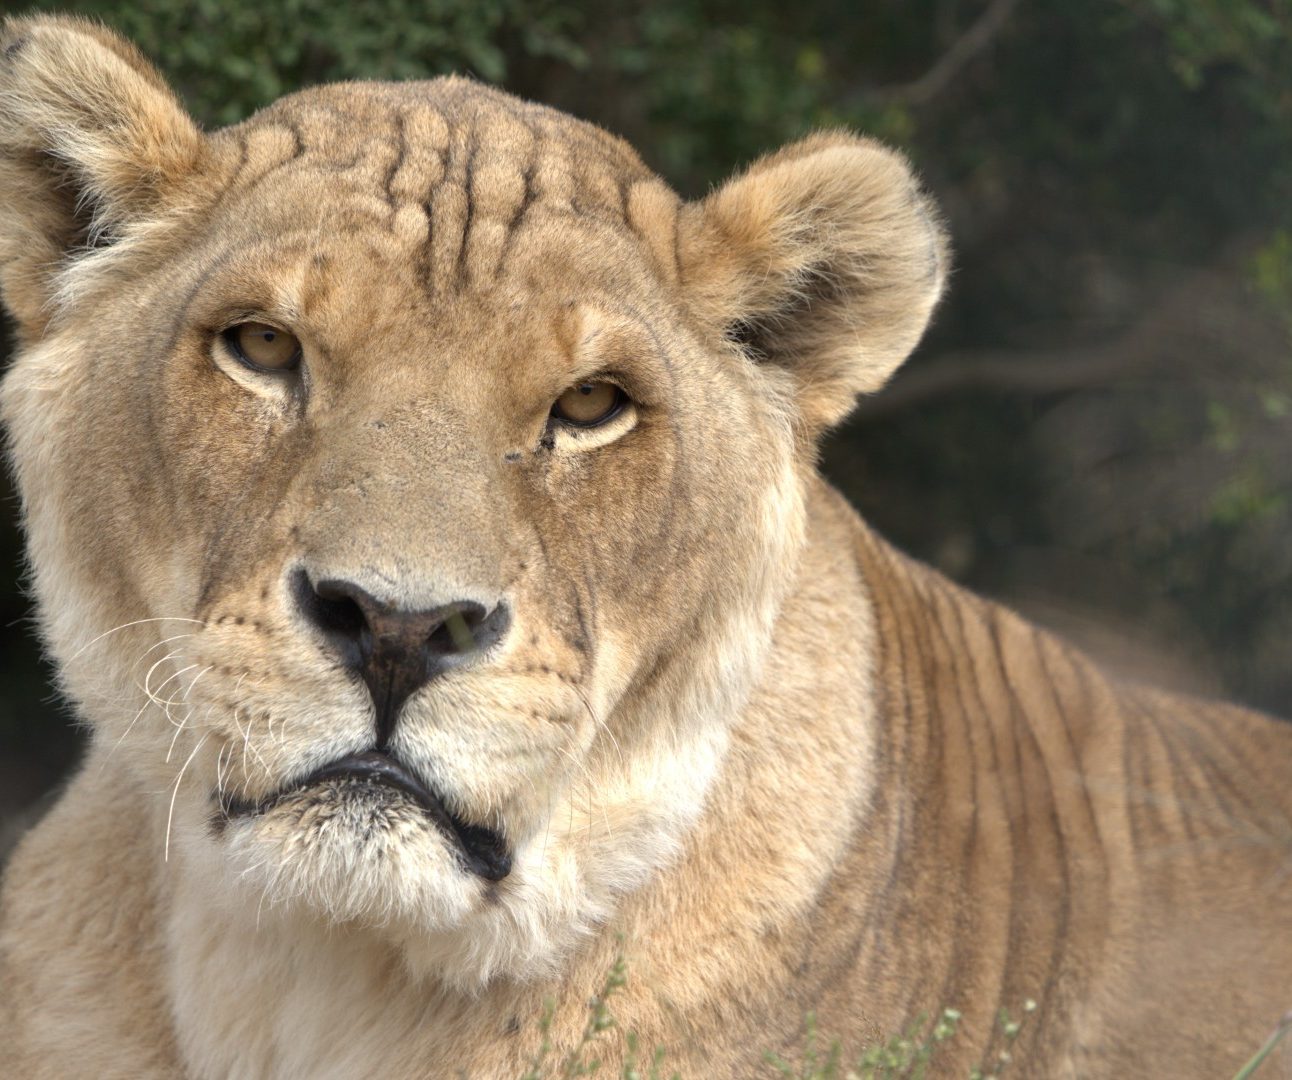 A close-up photo of a male lion with no mane